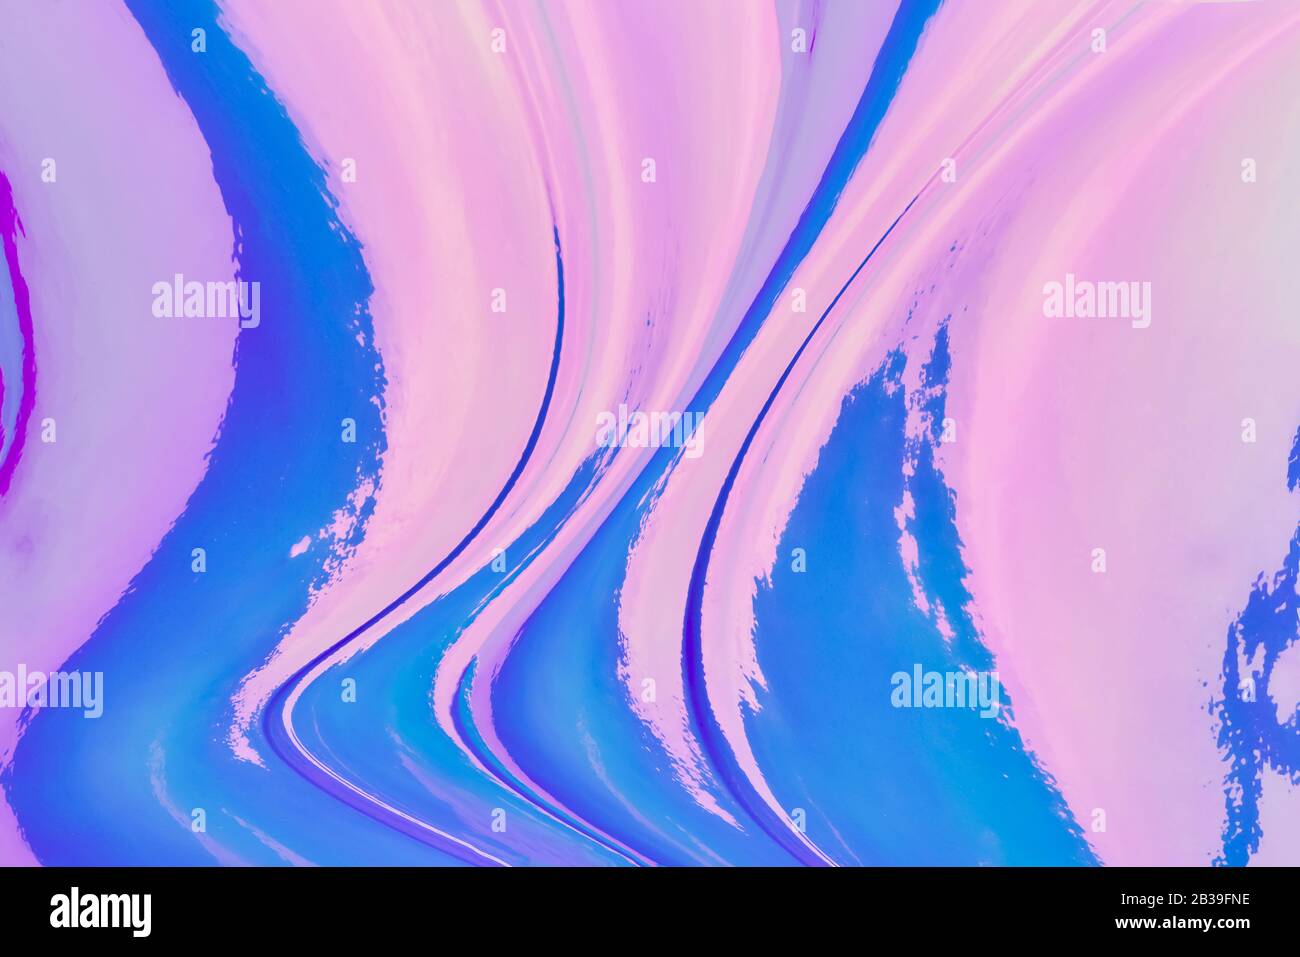 Abstrat colorful bakground. Pink-blue blurred bakground. Stock Photo